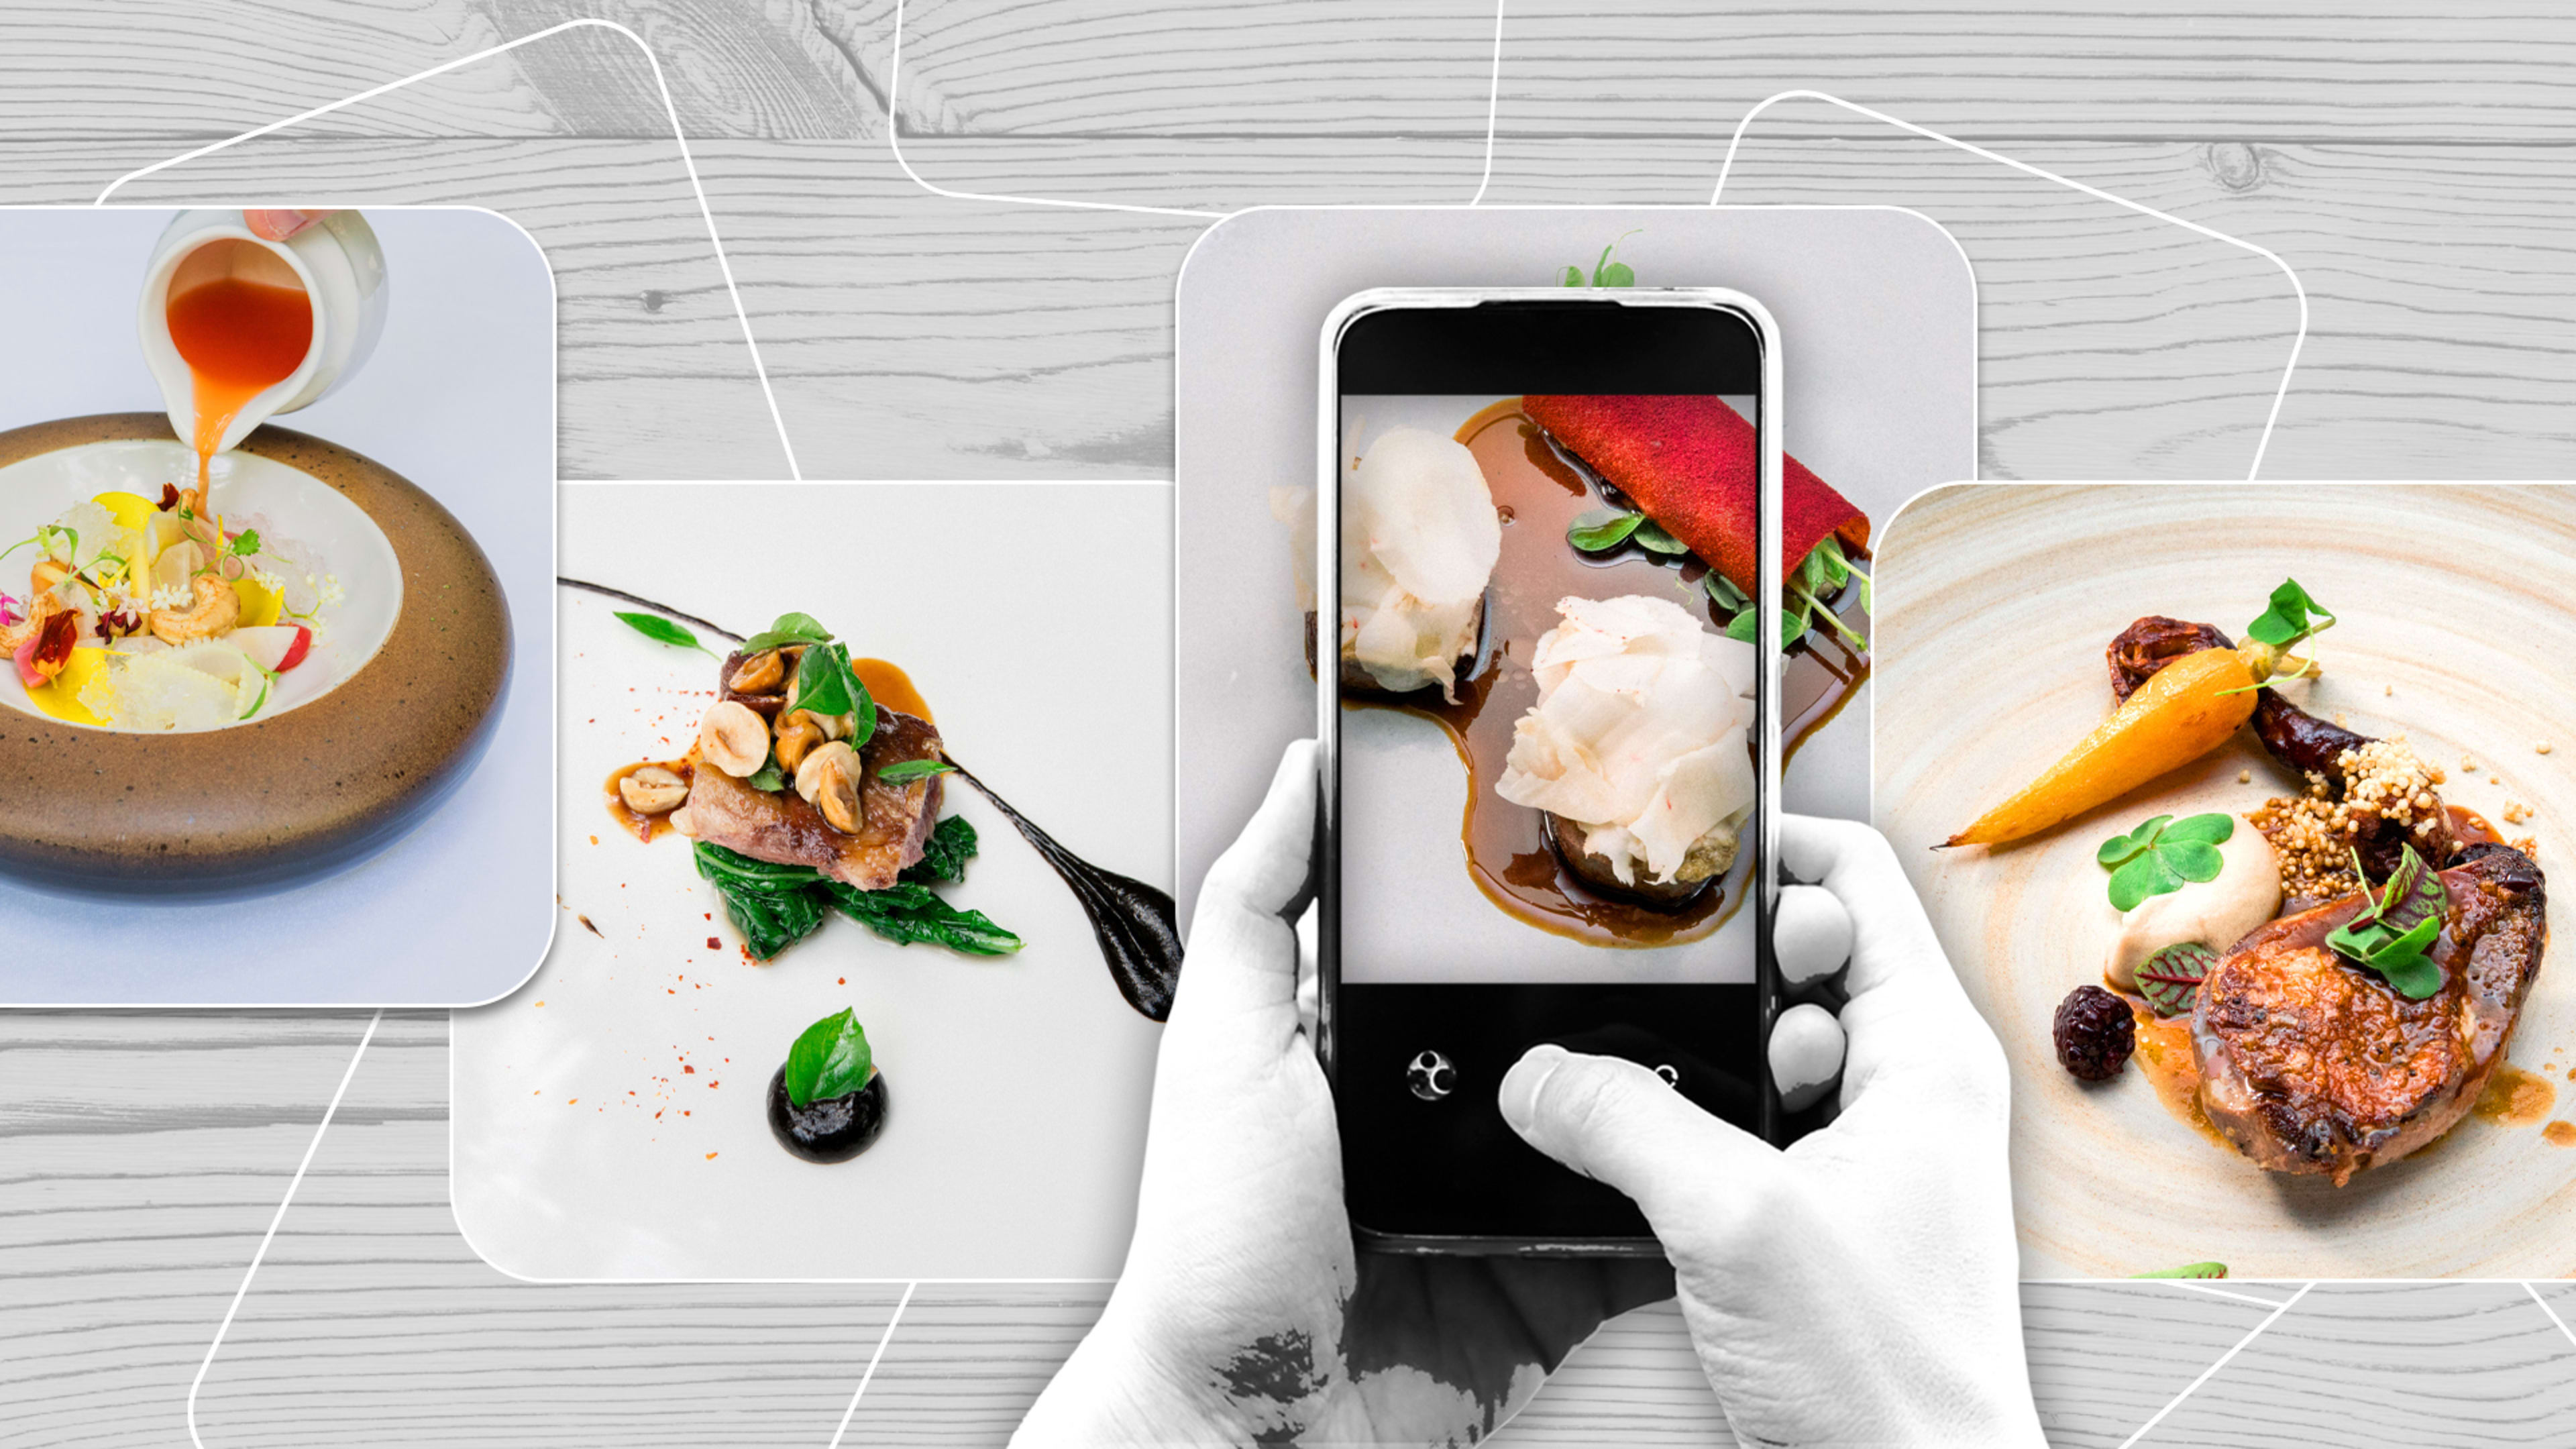 This Instagrammer is reinventing the creative art of restaurant reviews